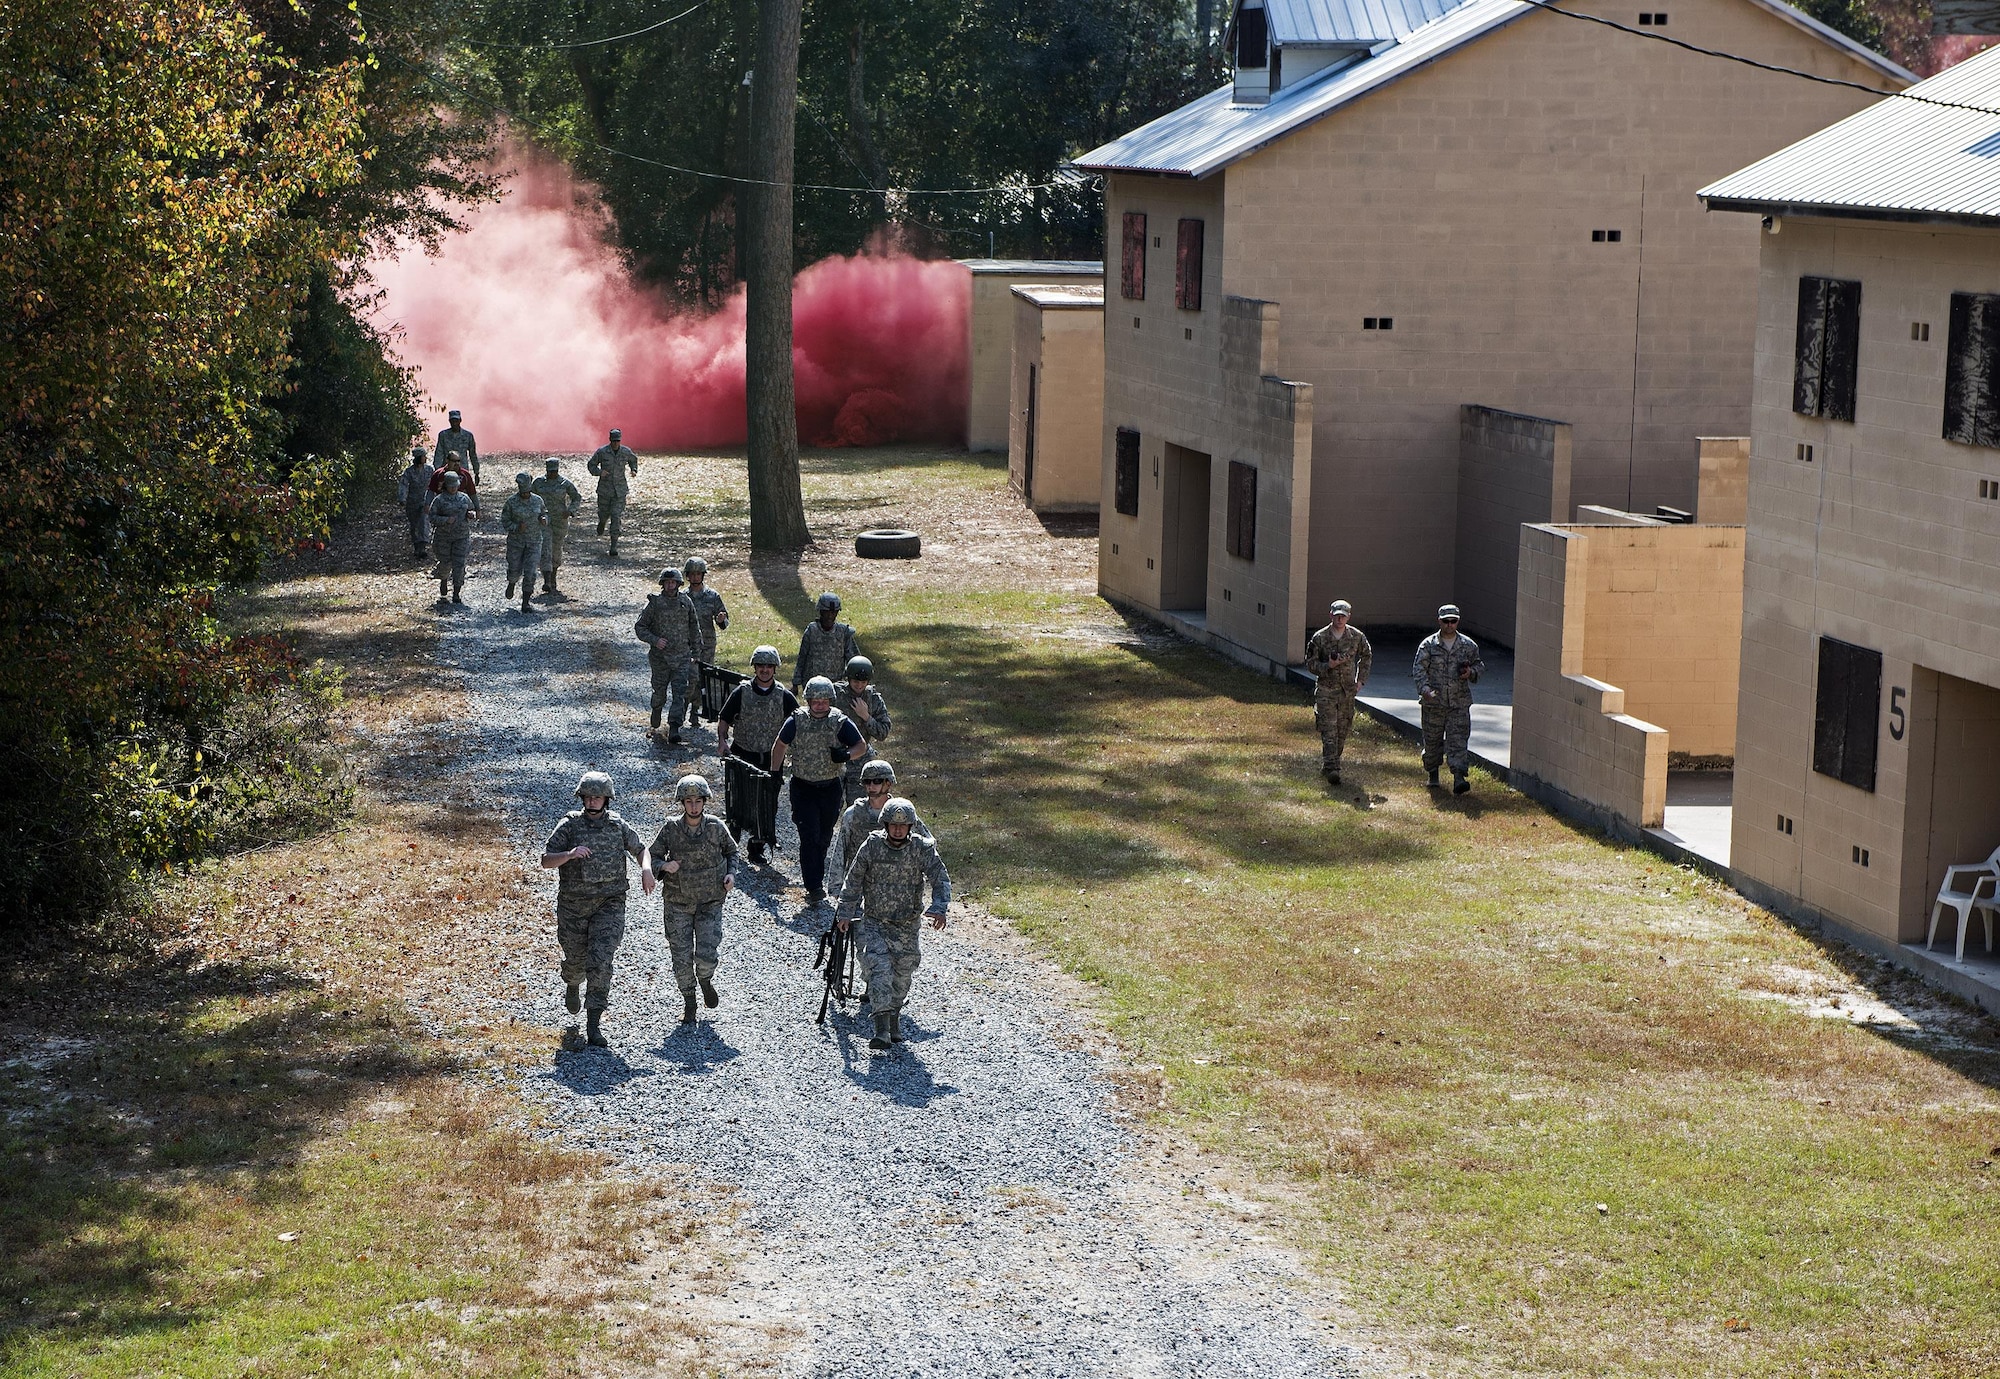 A team of medics respond to a simulated attack during an Emergency Medical Technician refresher course, Nov. 4, 2016, at Moody Air Force Base, Ga. The medics utilized the Military Operations in Urban Terrain village where they were tested on skills they’d spent the week refreshing. (U.S. Air Force photo by Airman 1st Class Janiqua P. Robinson)